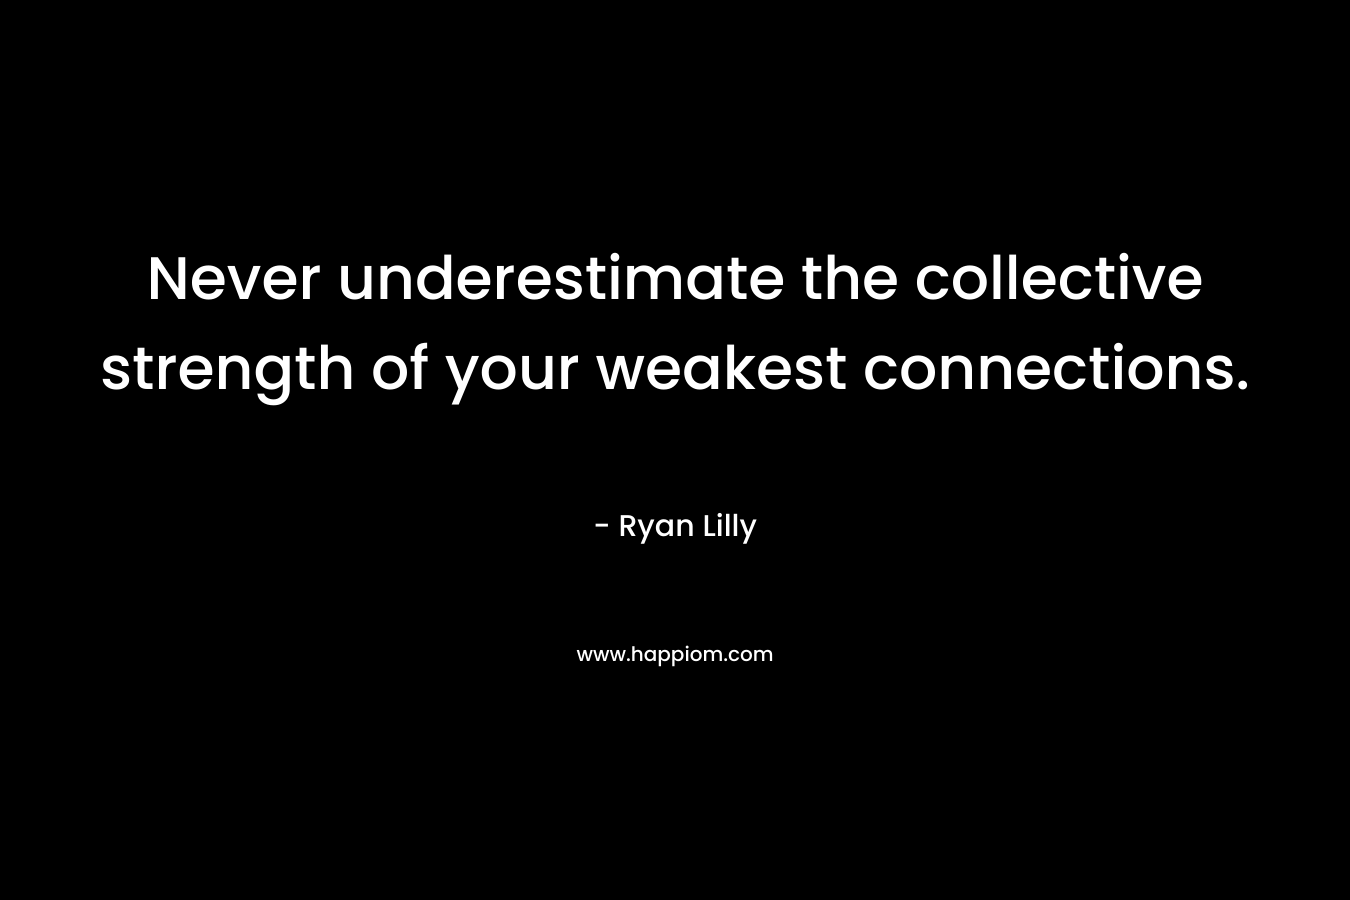 Never underestimate the collective strength of your weakest connections.